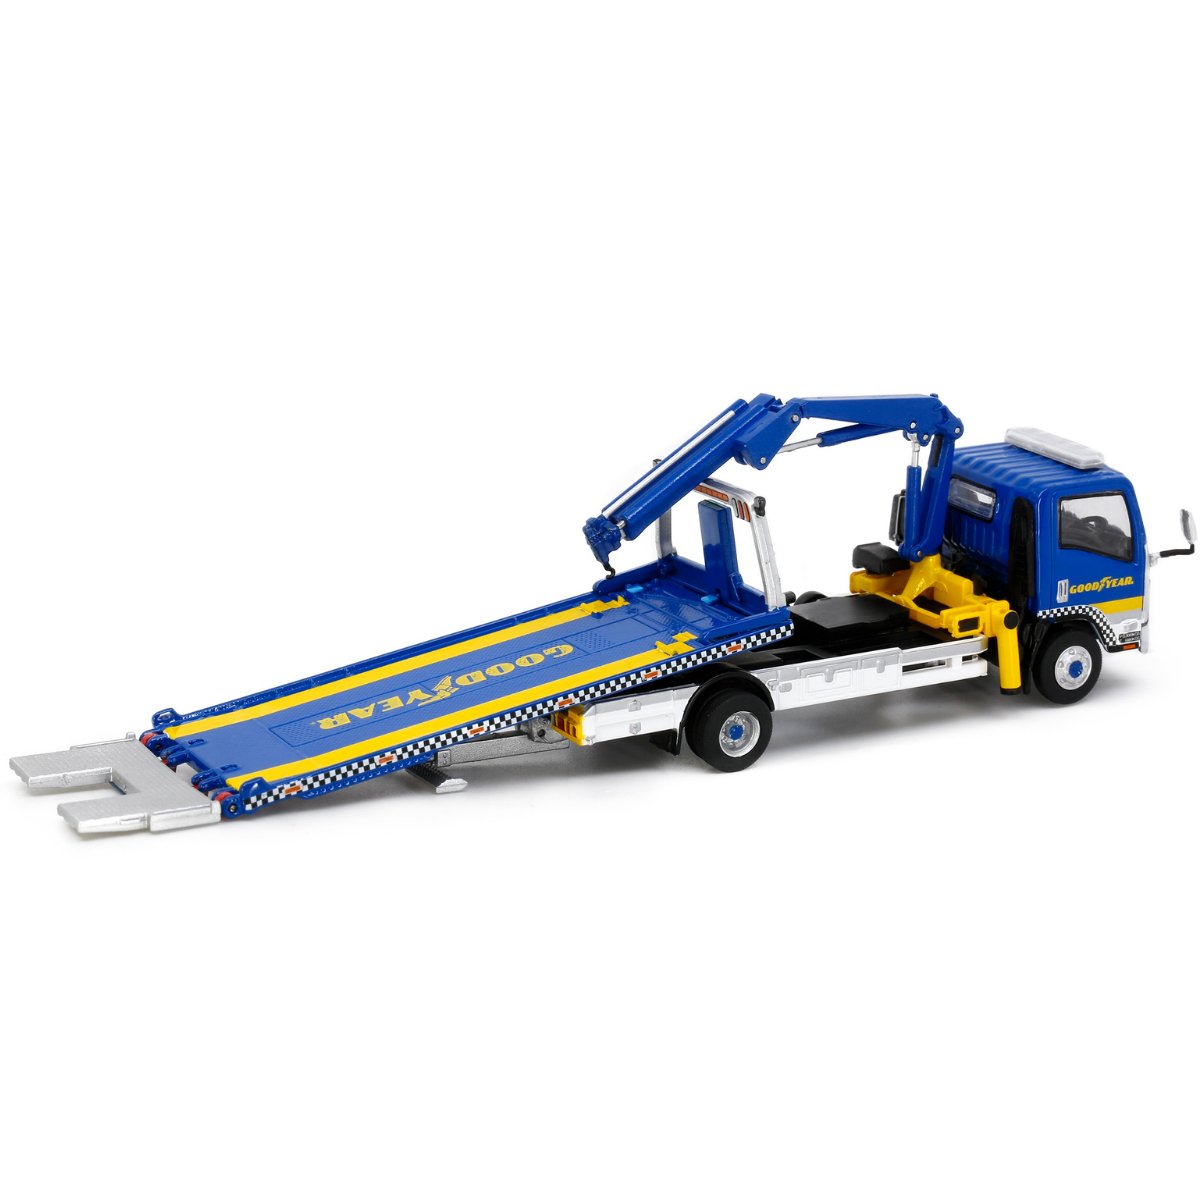 Tiny Models Isuzu N Series Flatbed Tow Truck With Crane - Goodyear (1:76 Scale) - Phillips Hobbies